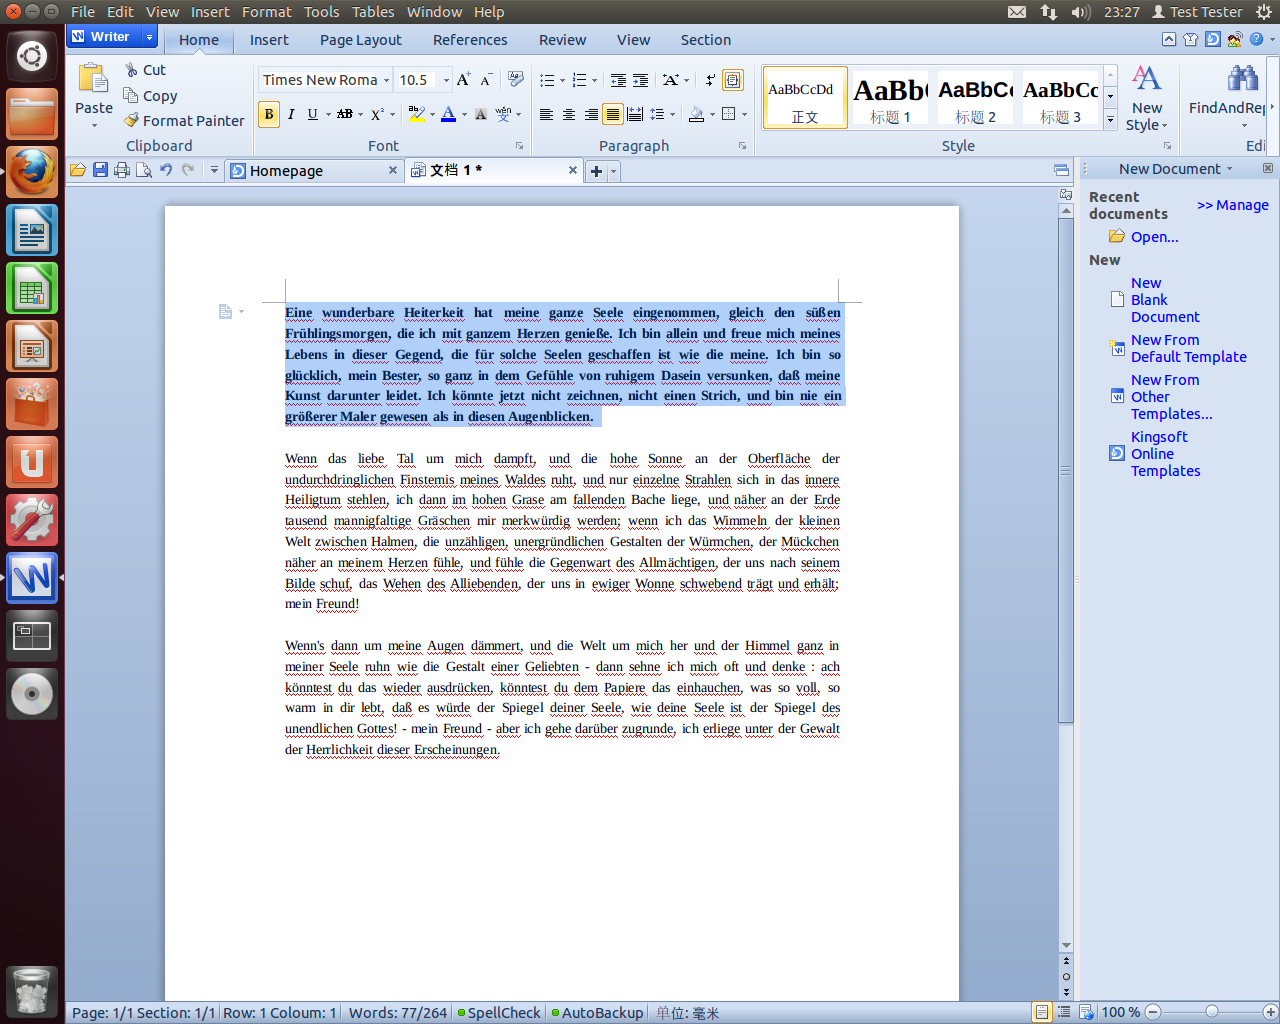 wps office for osx